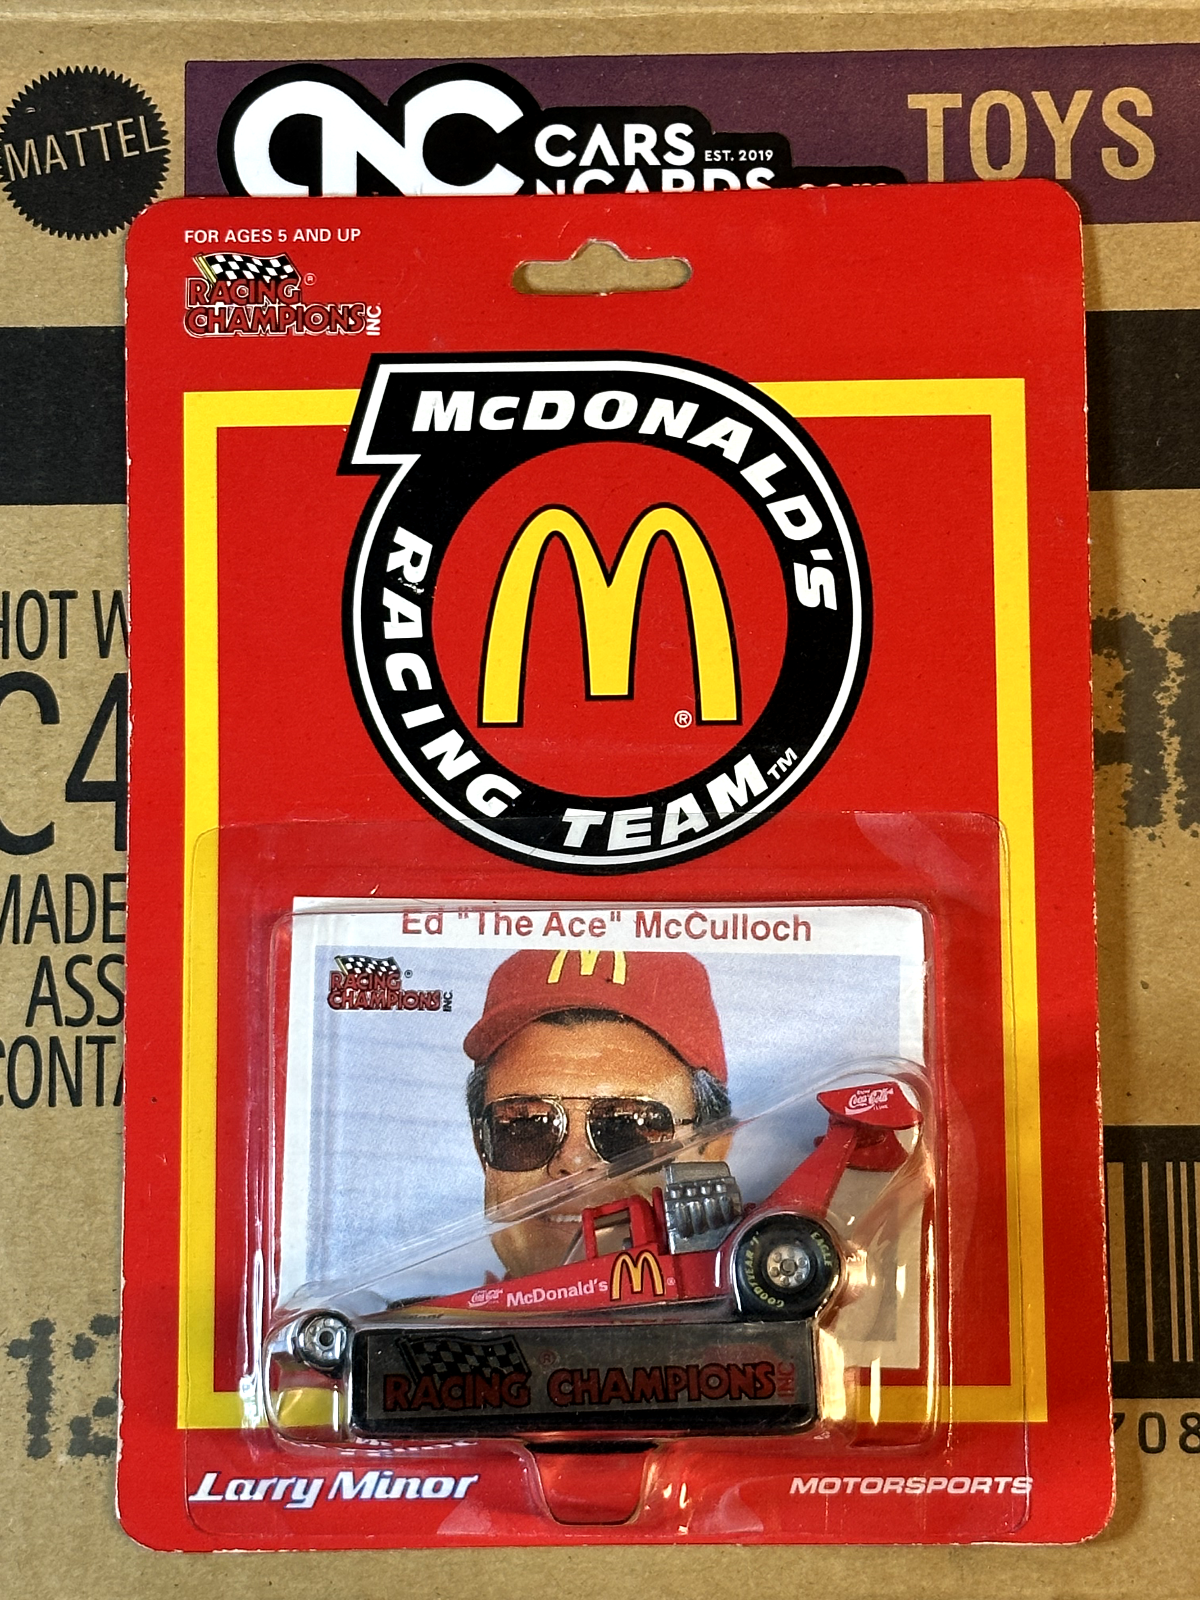 1994 Racing Champions McDonalds Ed "The Ace" McCulloch Drag Car